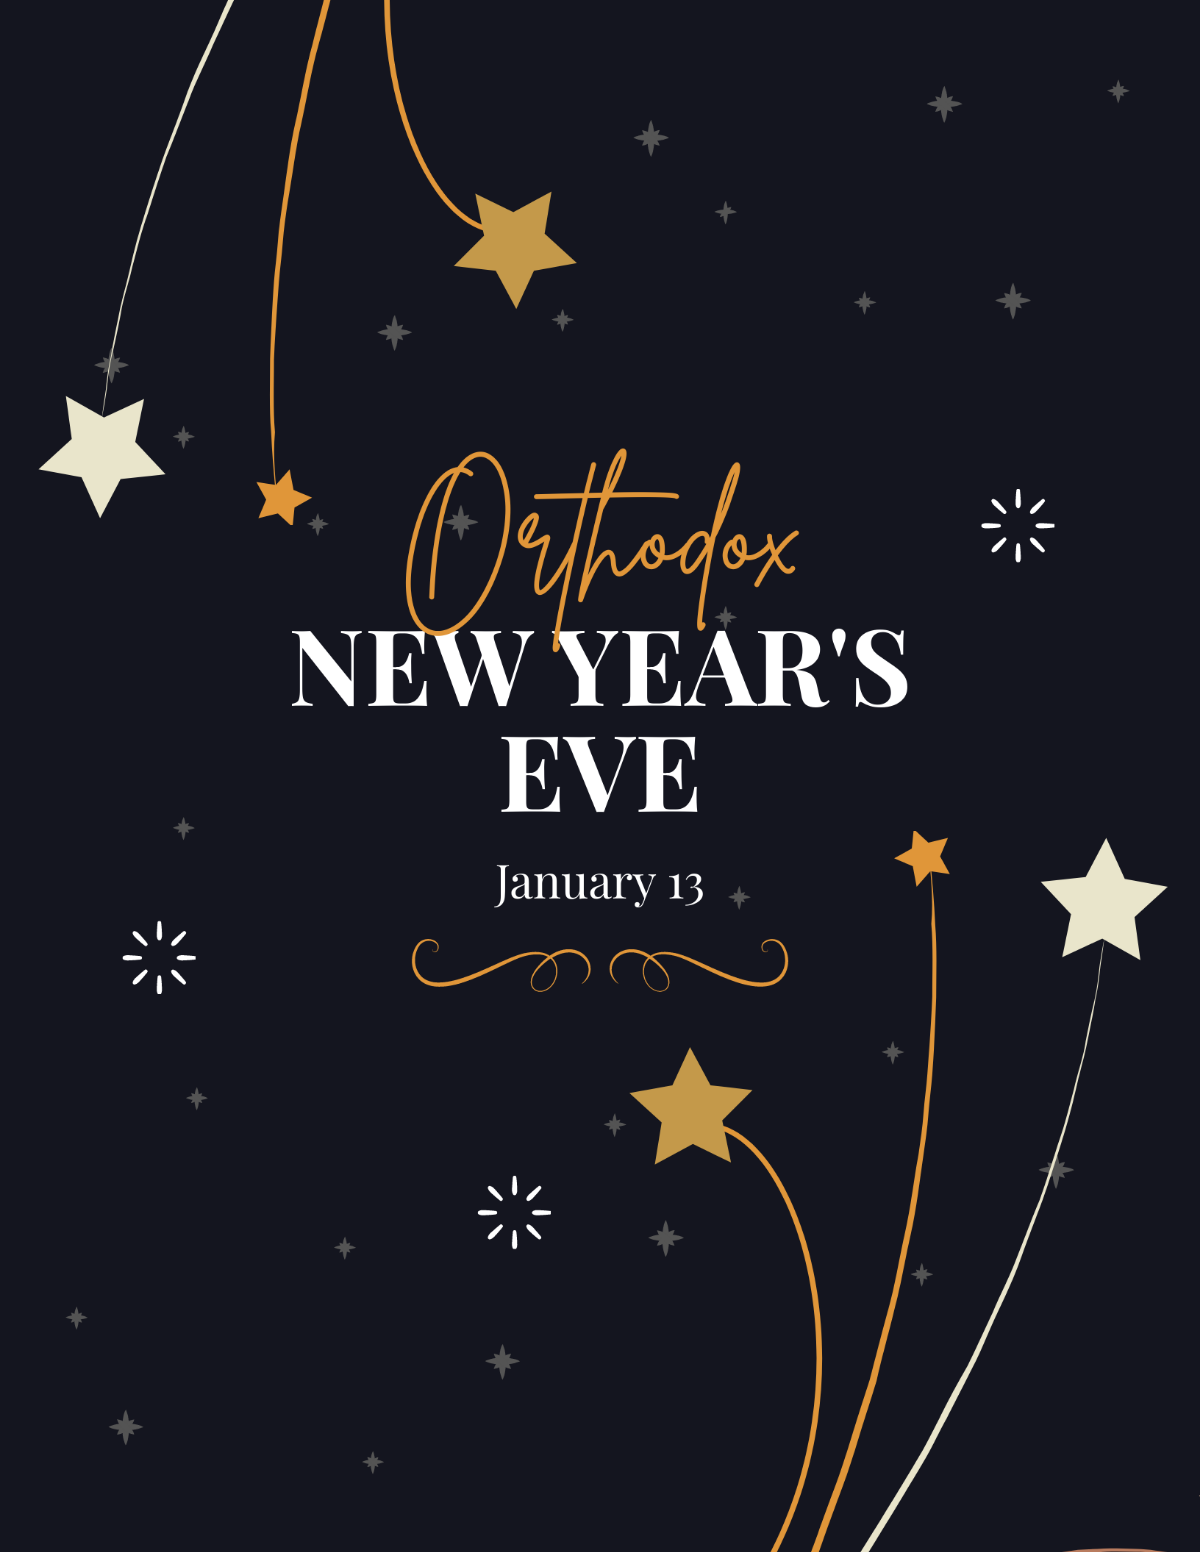 Free Orthodox New Year Eve Flyer Template